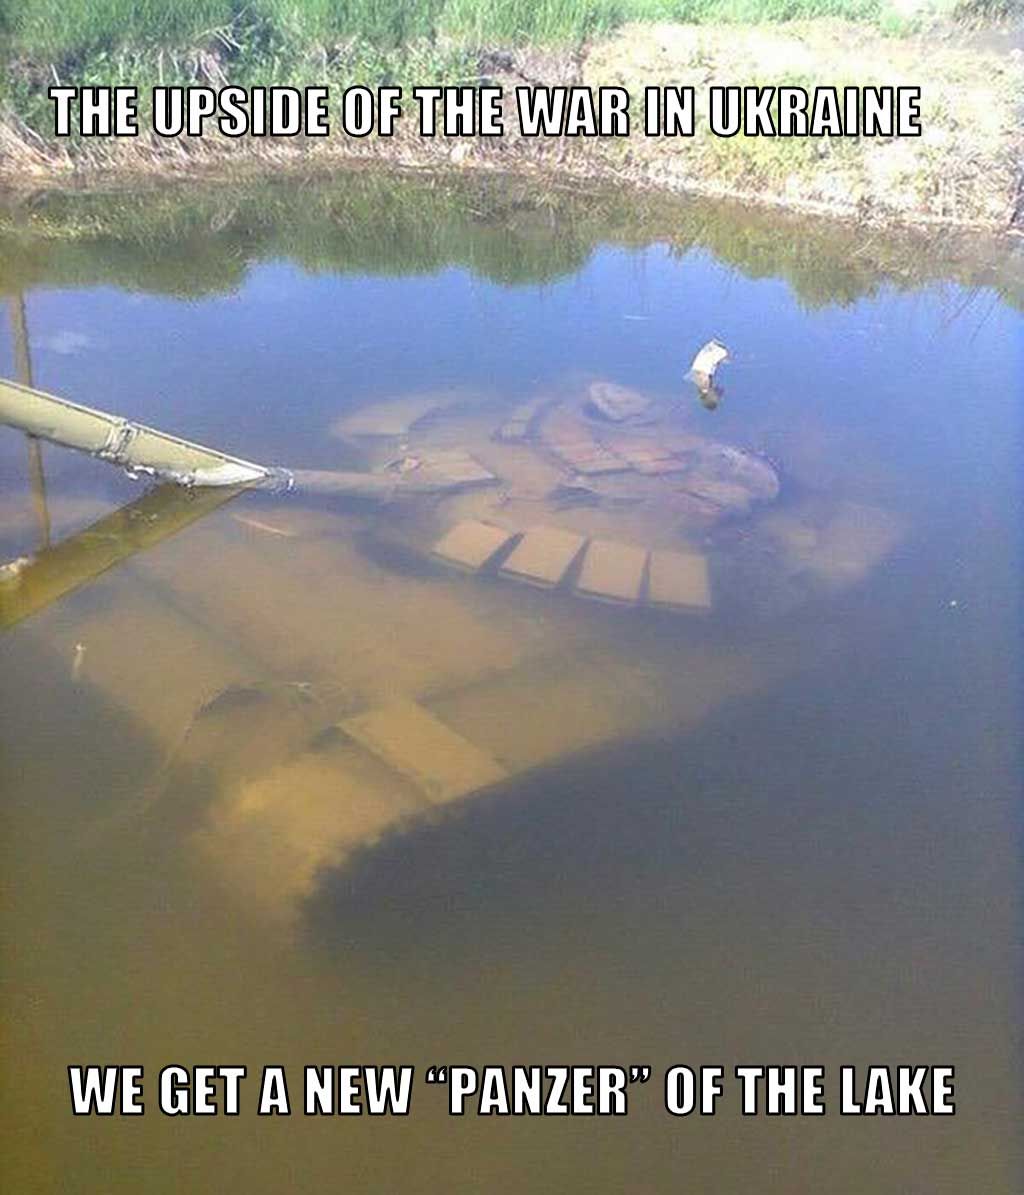 O Panzer of the lake, what is your wisdom?